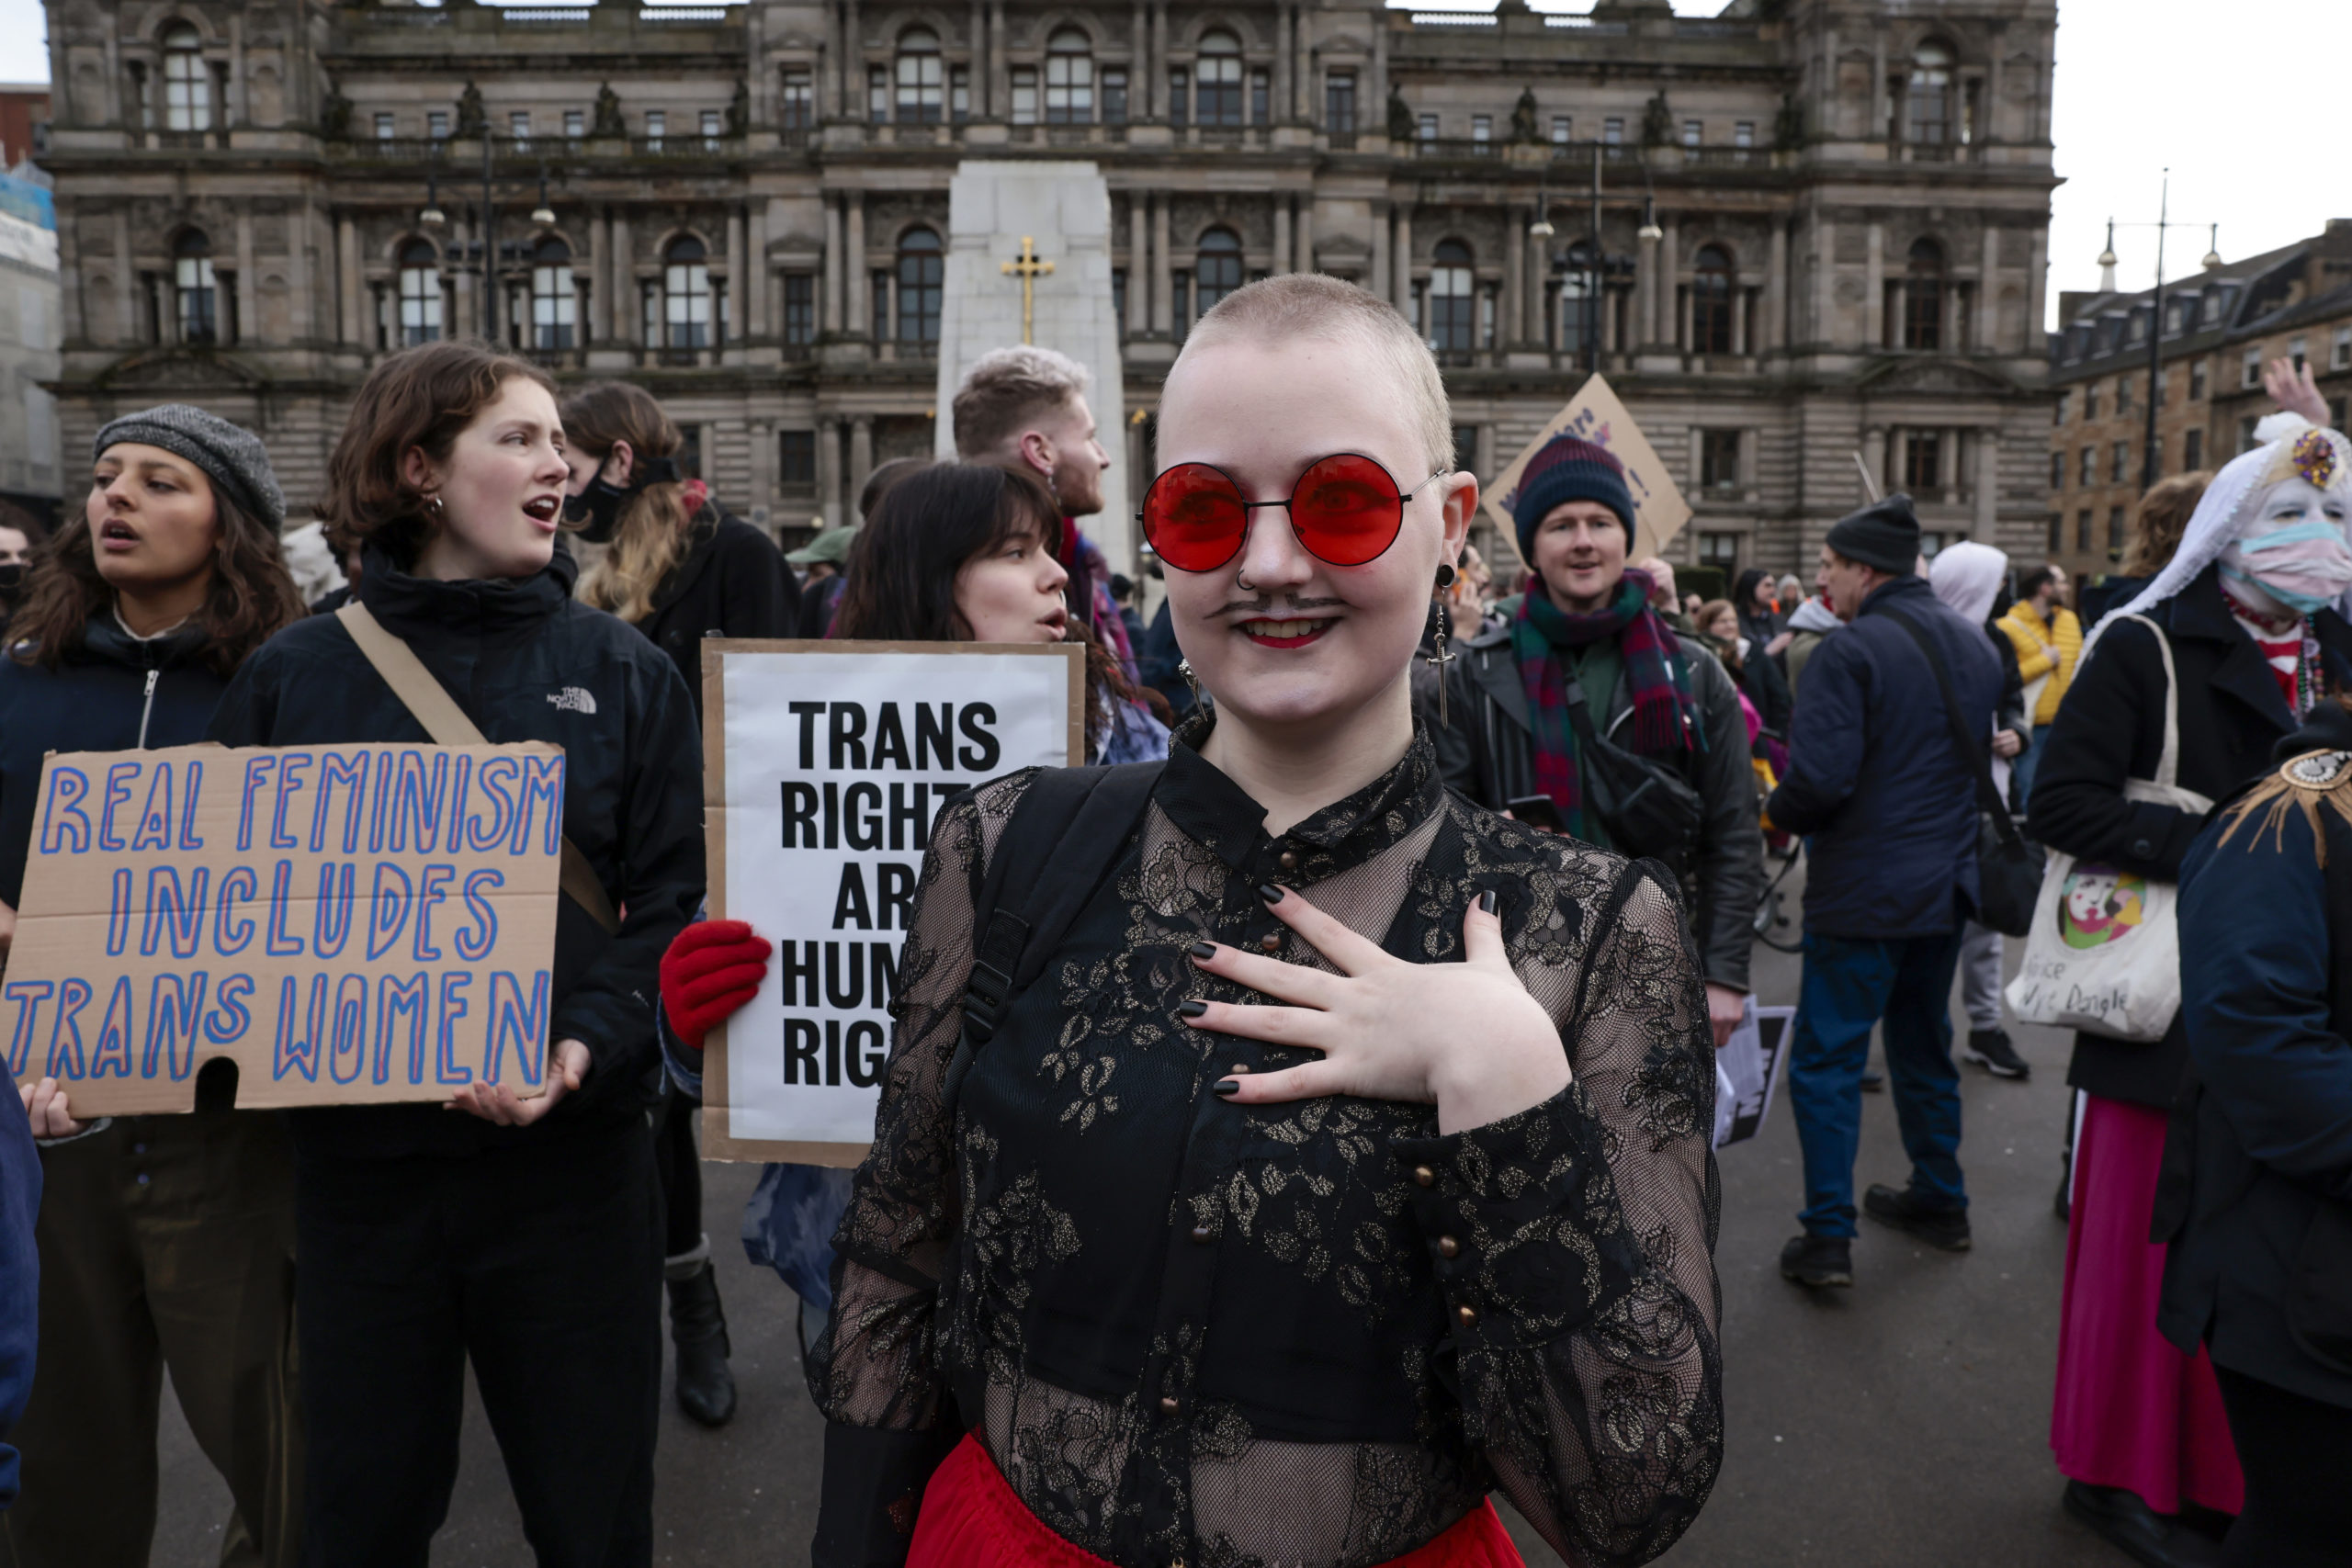 GLASGOW, SCOTLAND - FEBRUARY 05: Members of the public counterprotest against a Standing for Women event attended by anti-transgender-rights activist Kellie-Jay Keen on February 05, 2023 in Glasgow, Scotland. (Photo by Jeff J Mitchell/Getty Images)